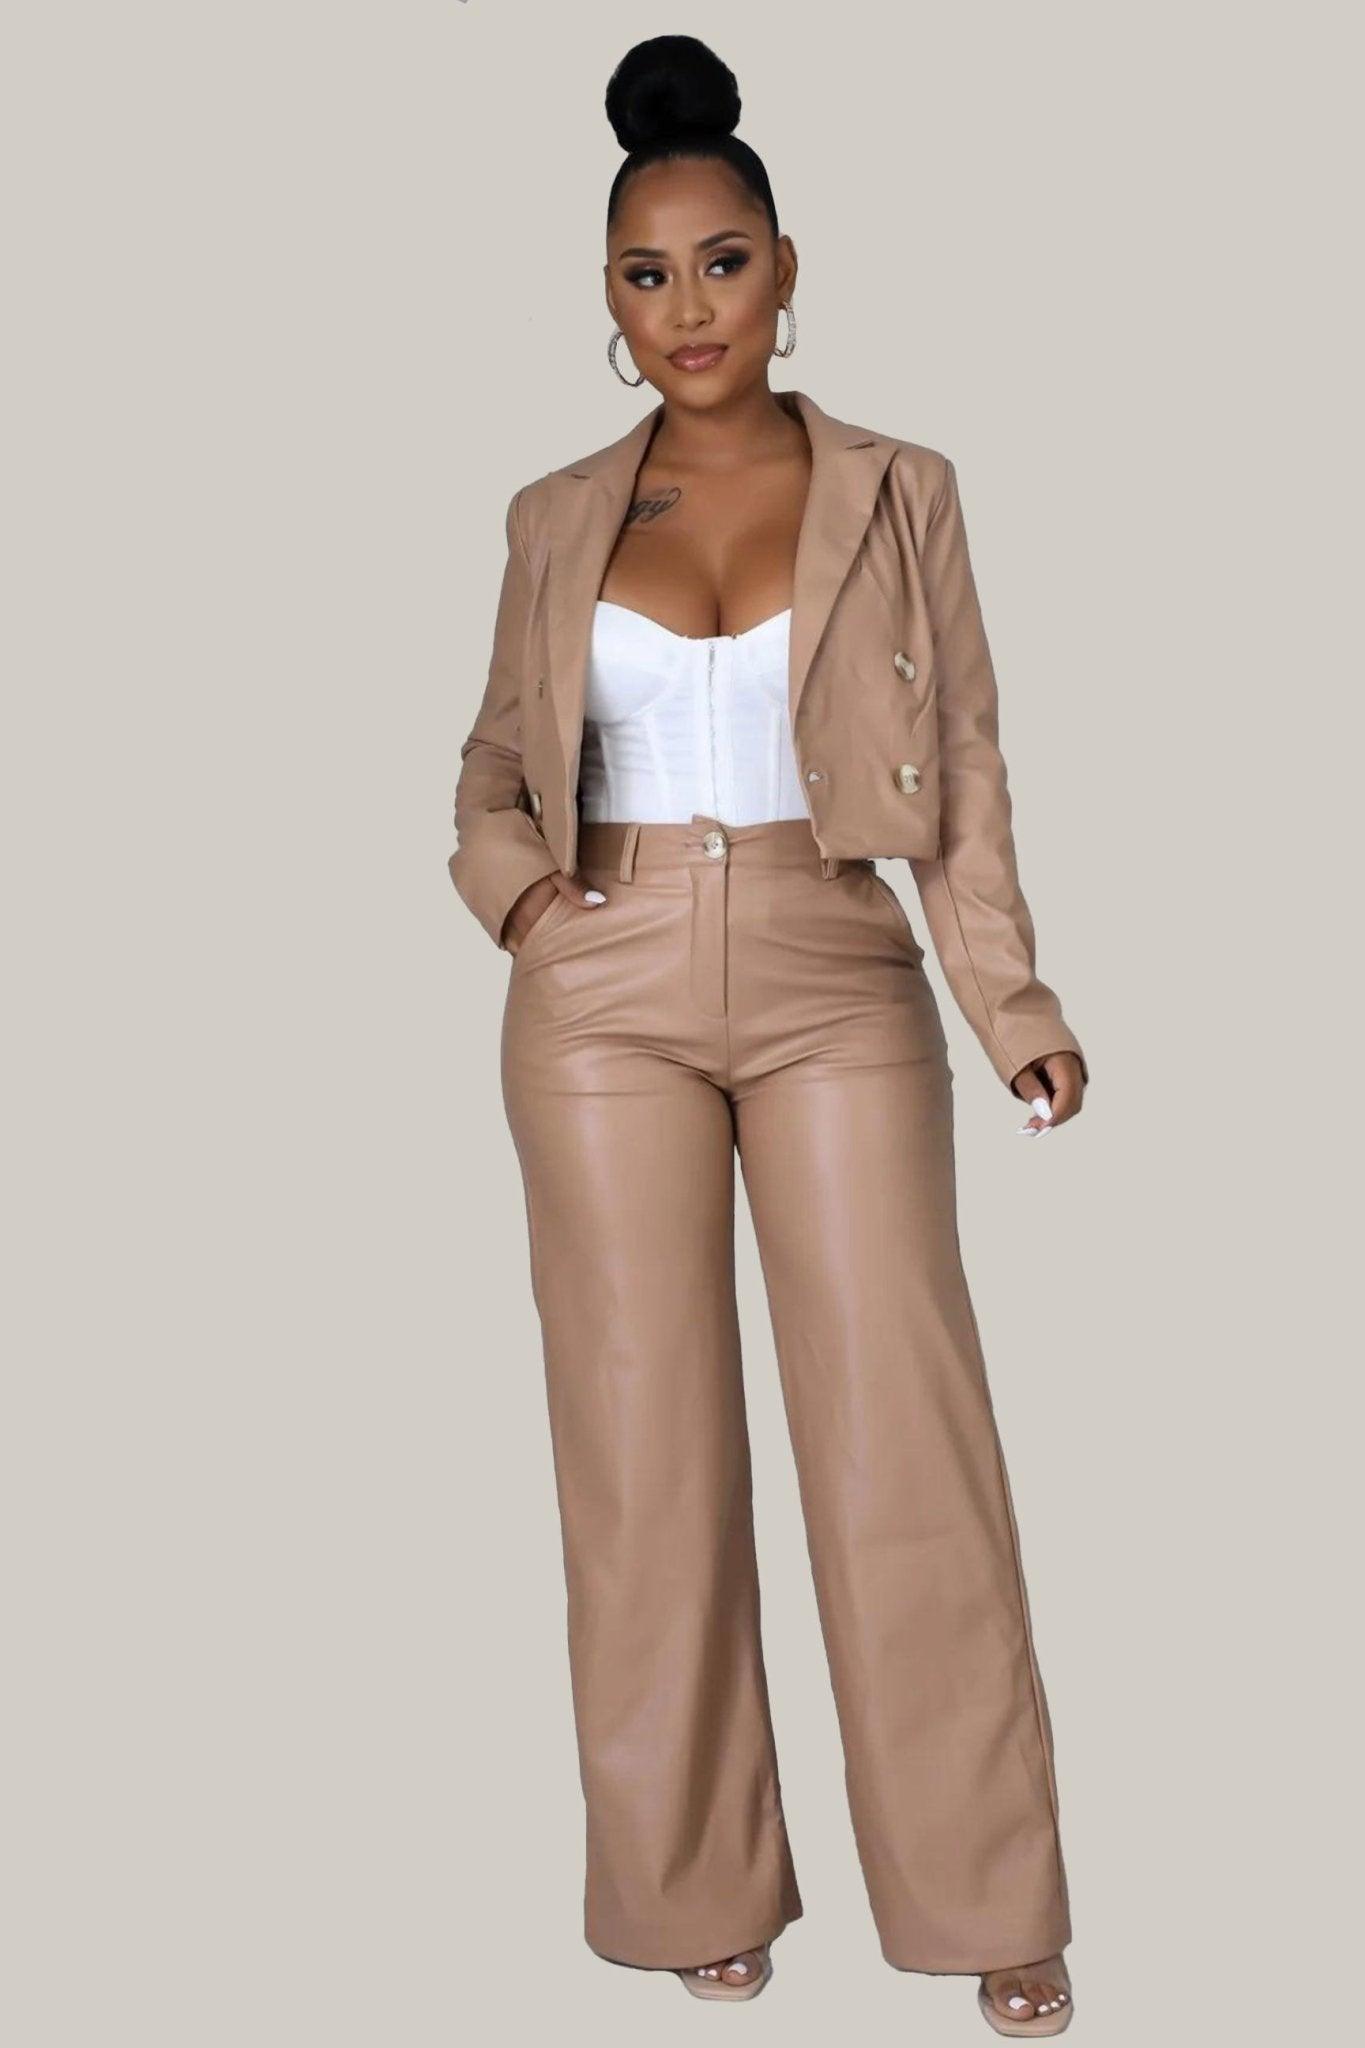 Braynlee Pants Faux Leather Set - MY SEXY STYLES